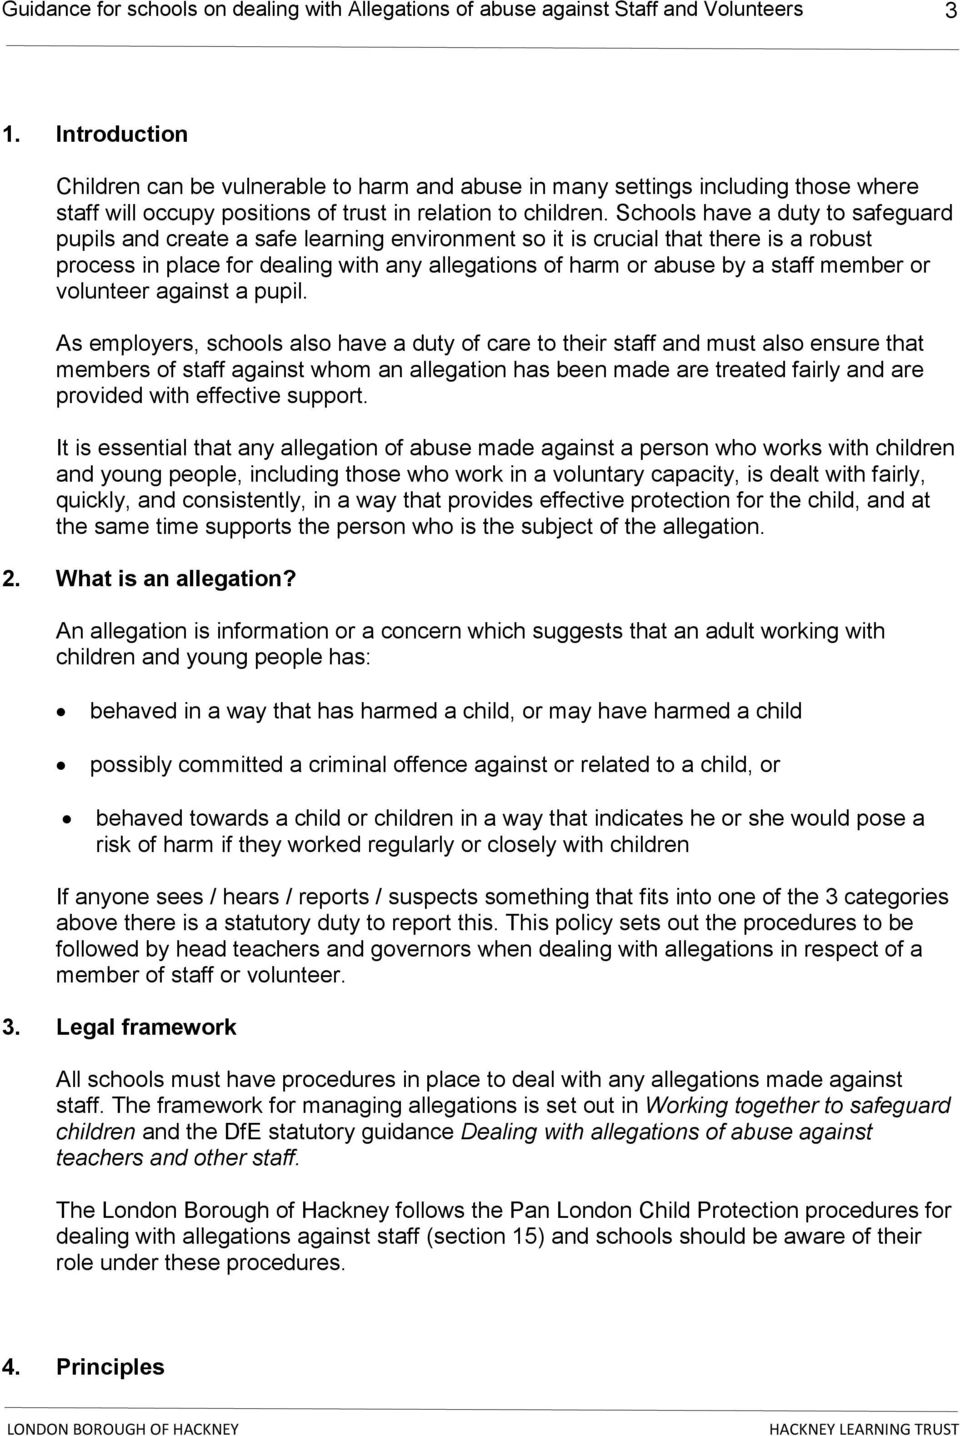 Schools have a duty to safeguard pupils and create a safe learning environment so it is crucial that there is a robust process in place for dealing with any allegations of harm or abuse by a staff